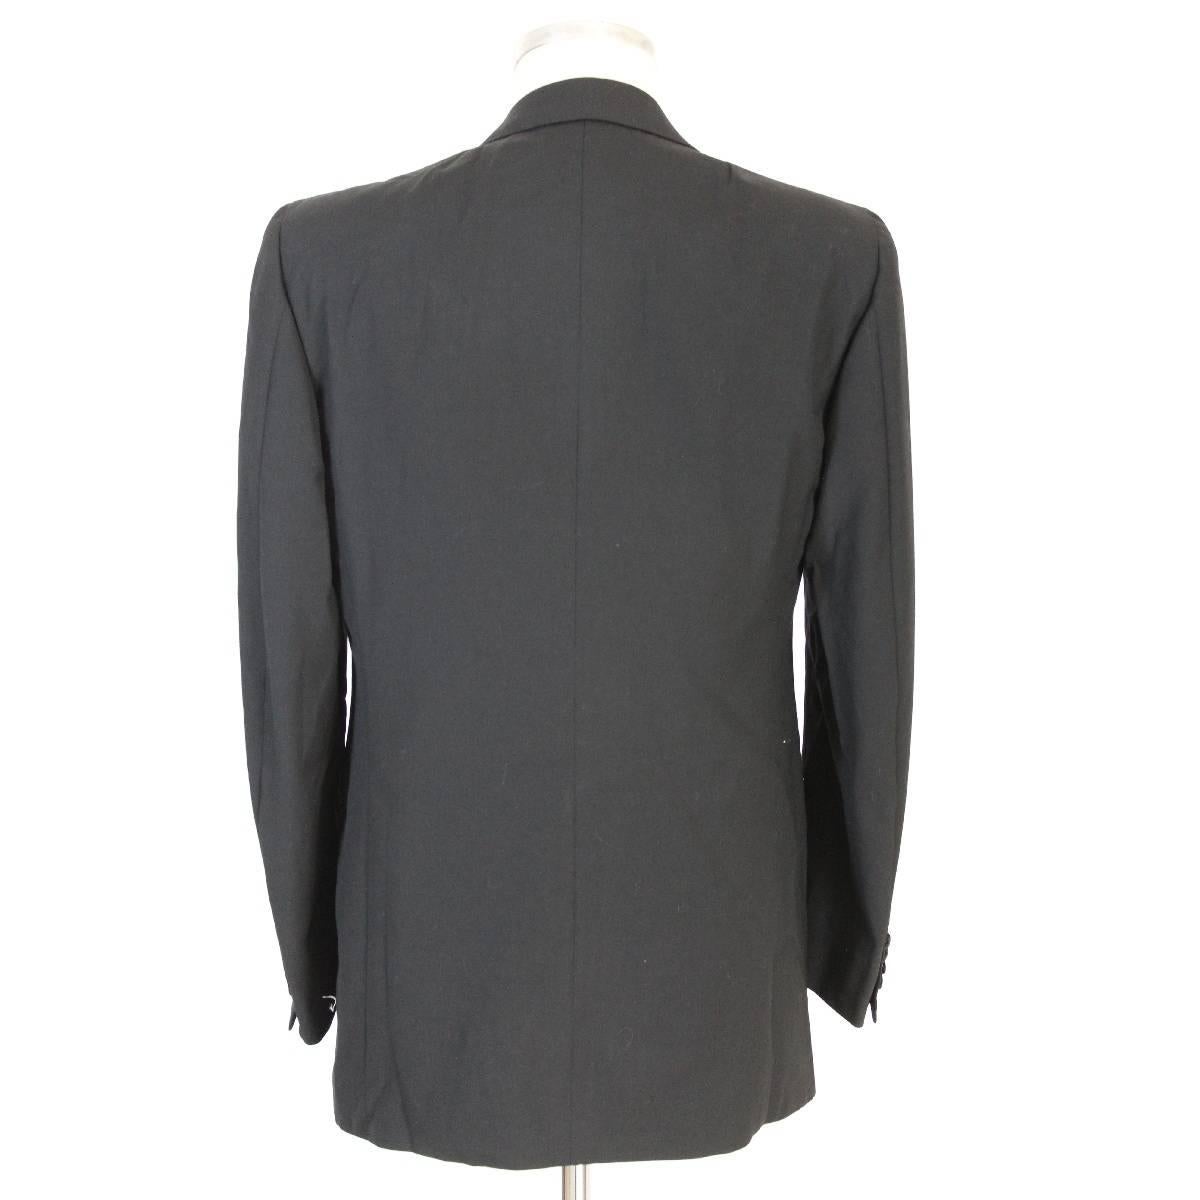 Brioni vintage smoking black jacket men’s 1980s. Satin on the reverse and on the pockets. Double-breasted made in Italy, size 50 made in Italy. New with label

Size 50 It 40 Us 40 Uk

Shoulder: 50 cm
Bust / chest: 52 cm
Sleeve: 62 cm
Length: 82